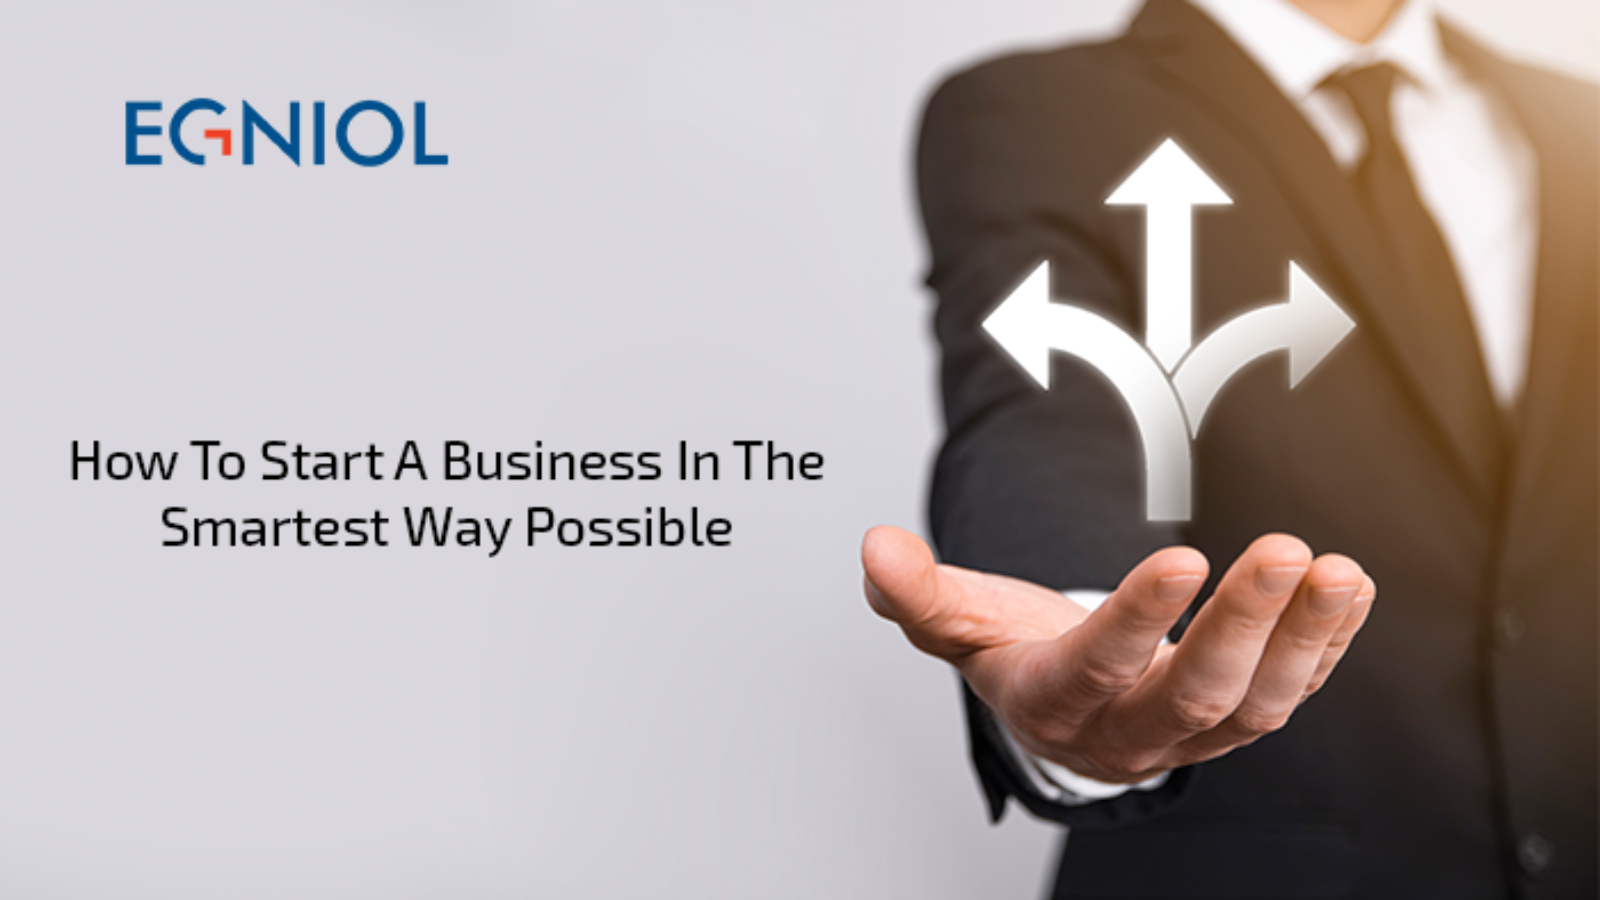 How To Start A Business In India - The Smartest Way by Egniol